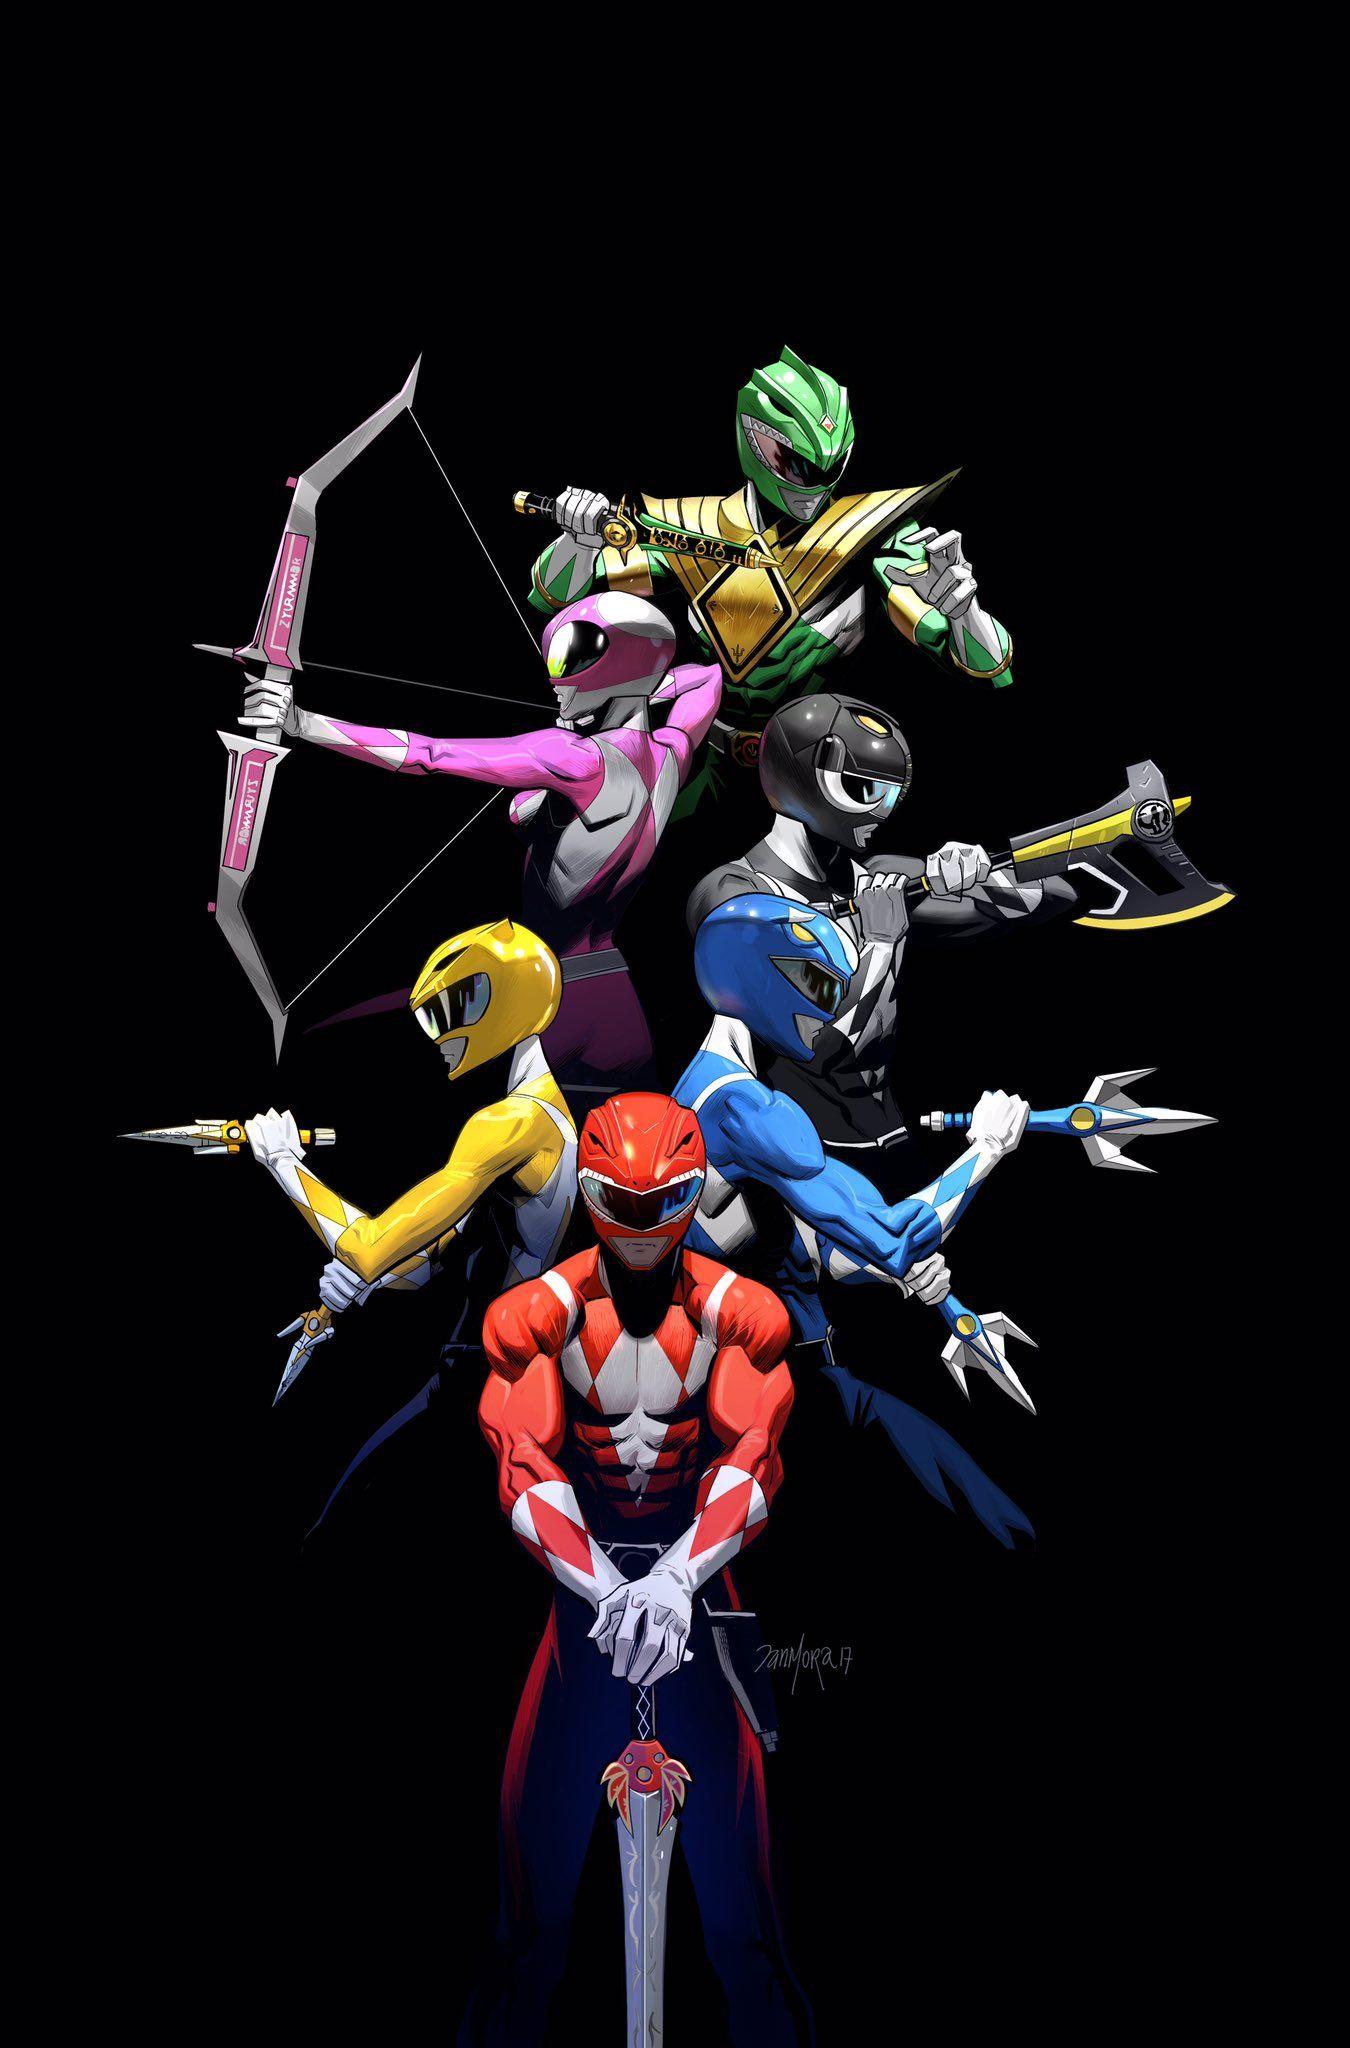 Mighty Morphin Power Rangers 2017 Annual Variant Cover